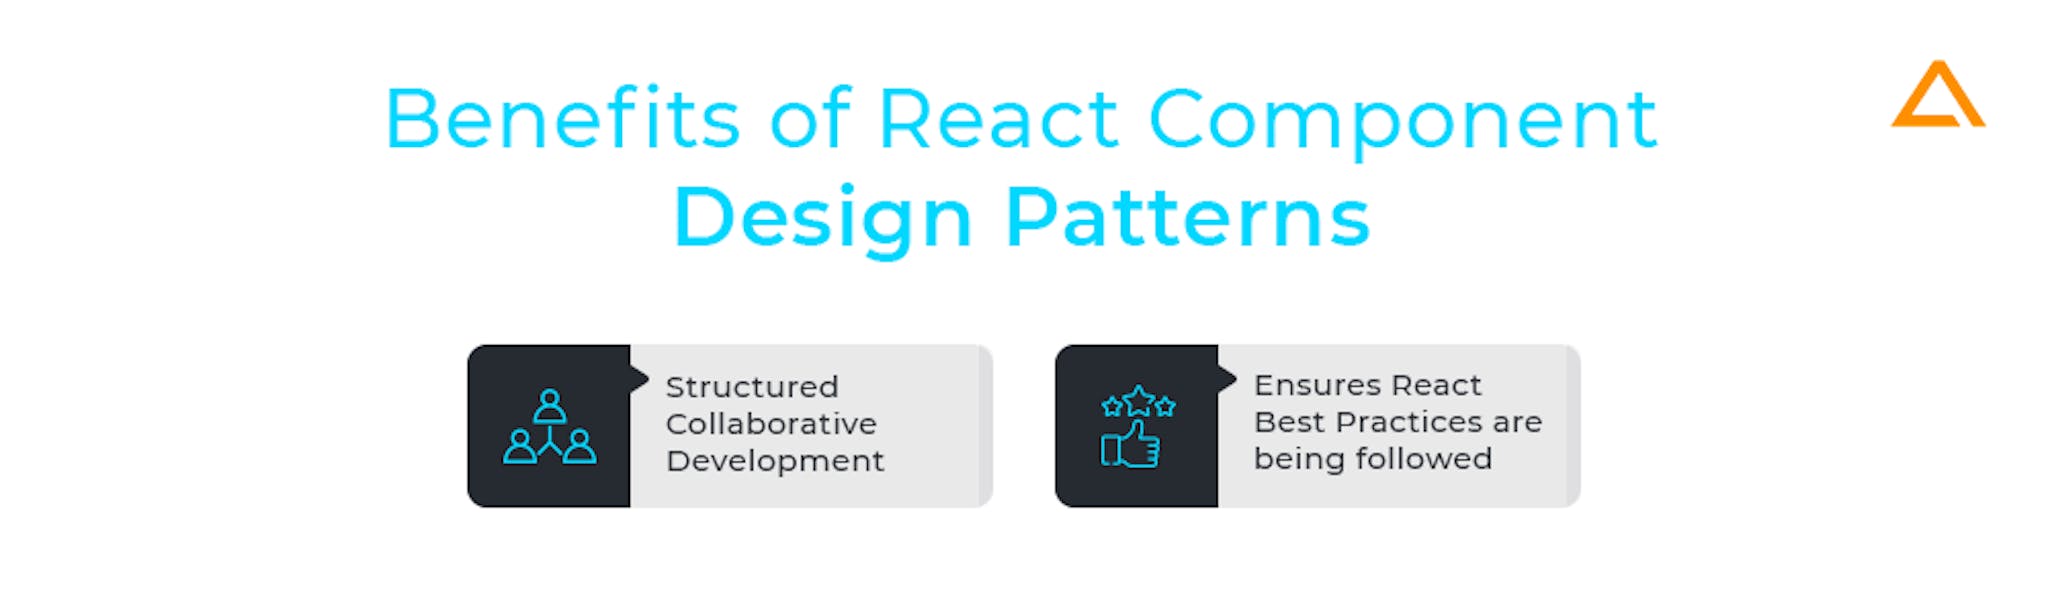 Benefits of React Component Design Patterns